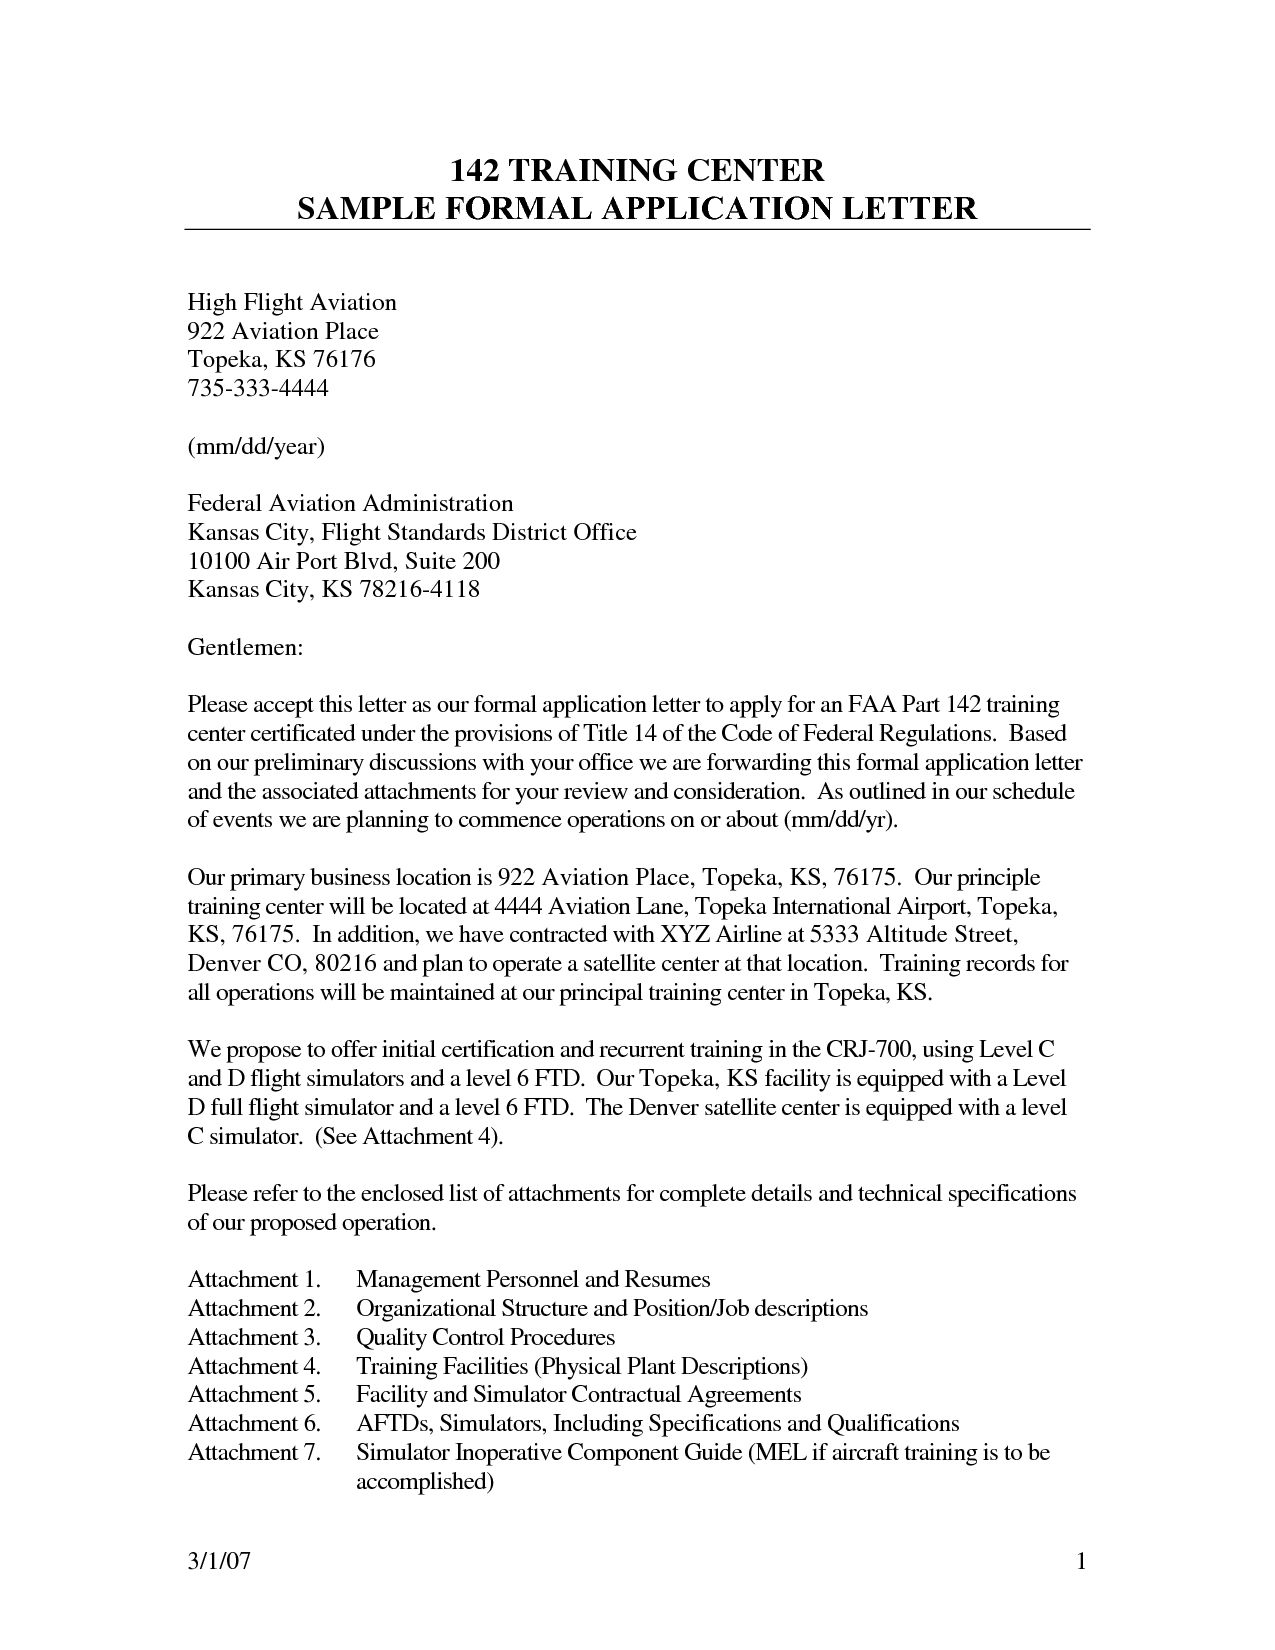 Application Letter Format Example Image